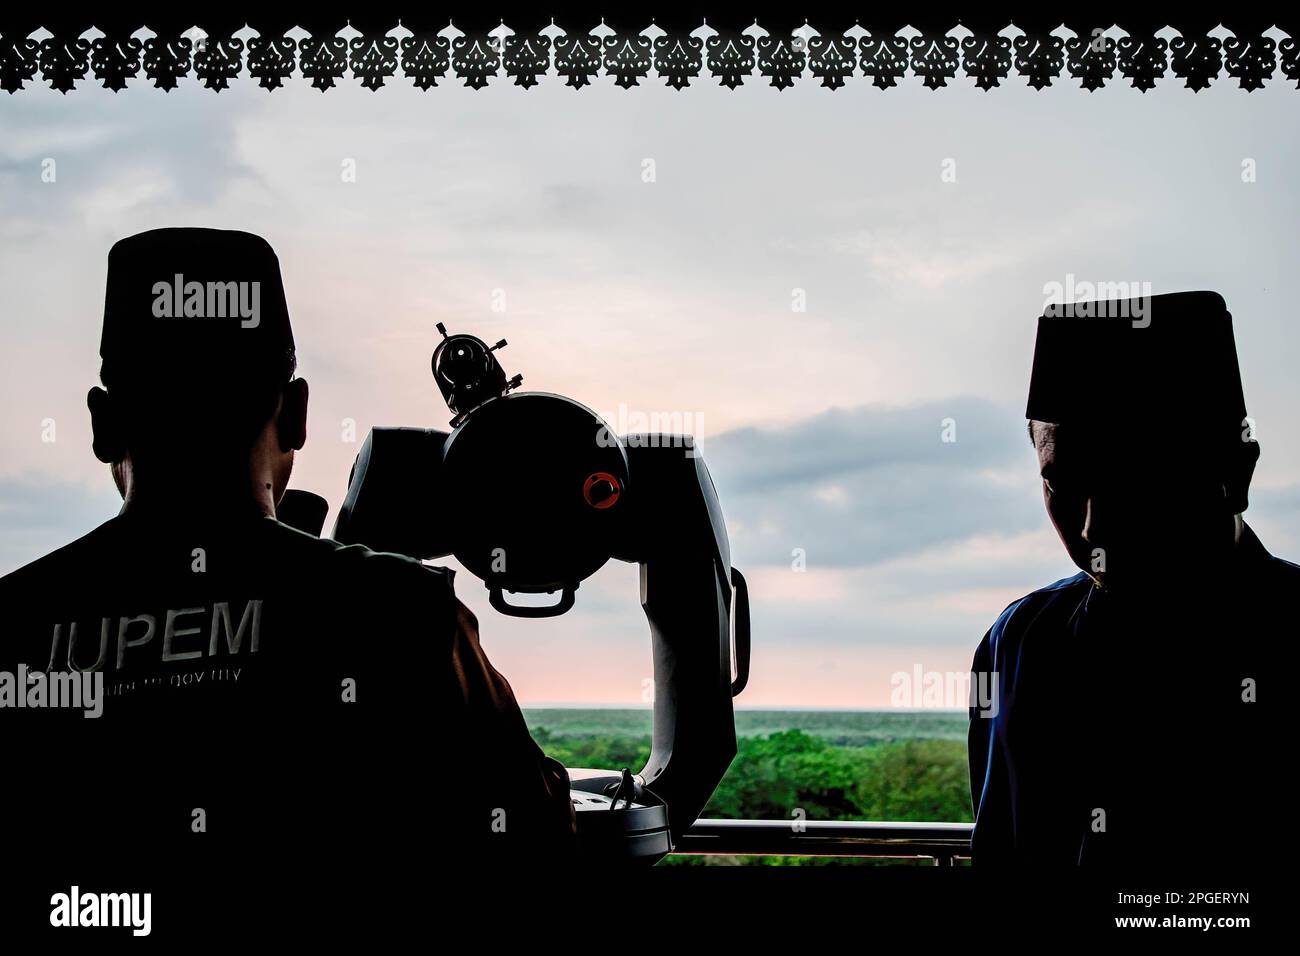 Silhouette of two officials from the Selangor Islamic Religious Council during a 'rukyah', a moon sighting ceremony to determine the start date of the holy month of Ramadan in Bukit Malawati. Stock Photo